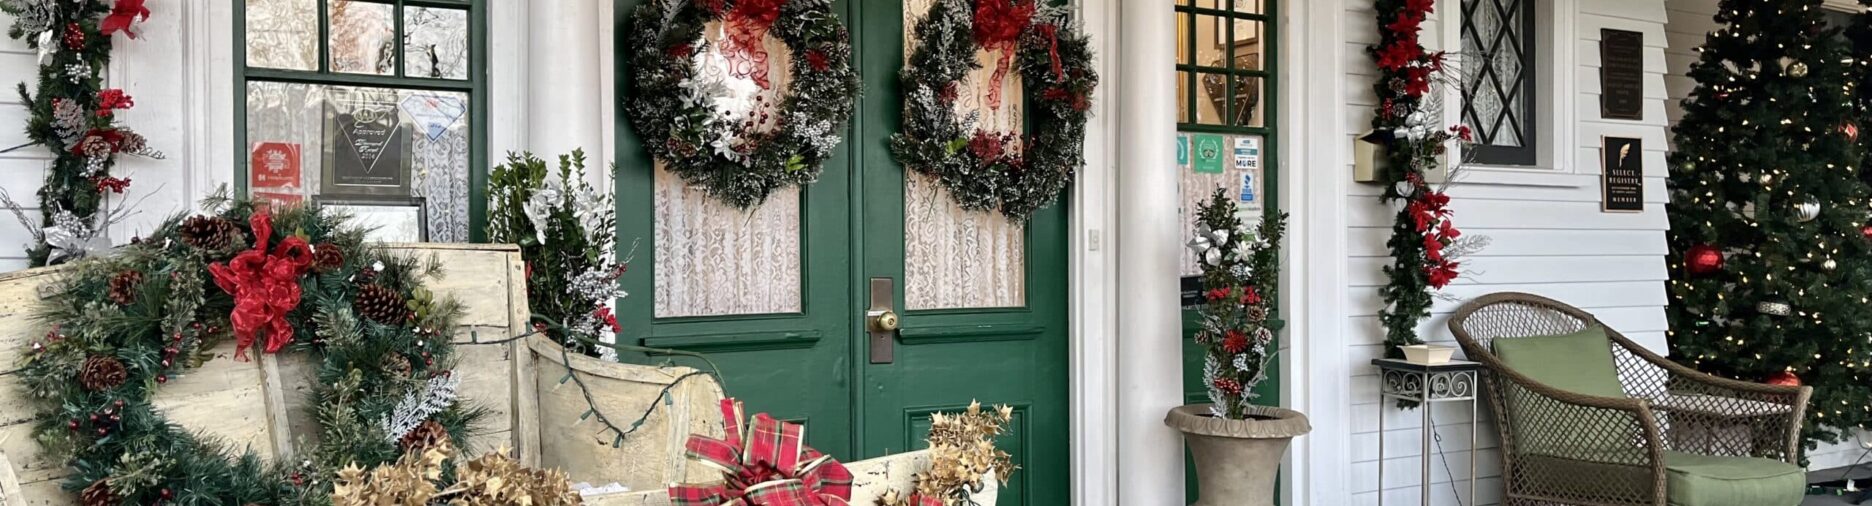 double door front door porch with red and green decorations